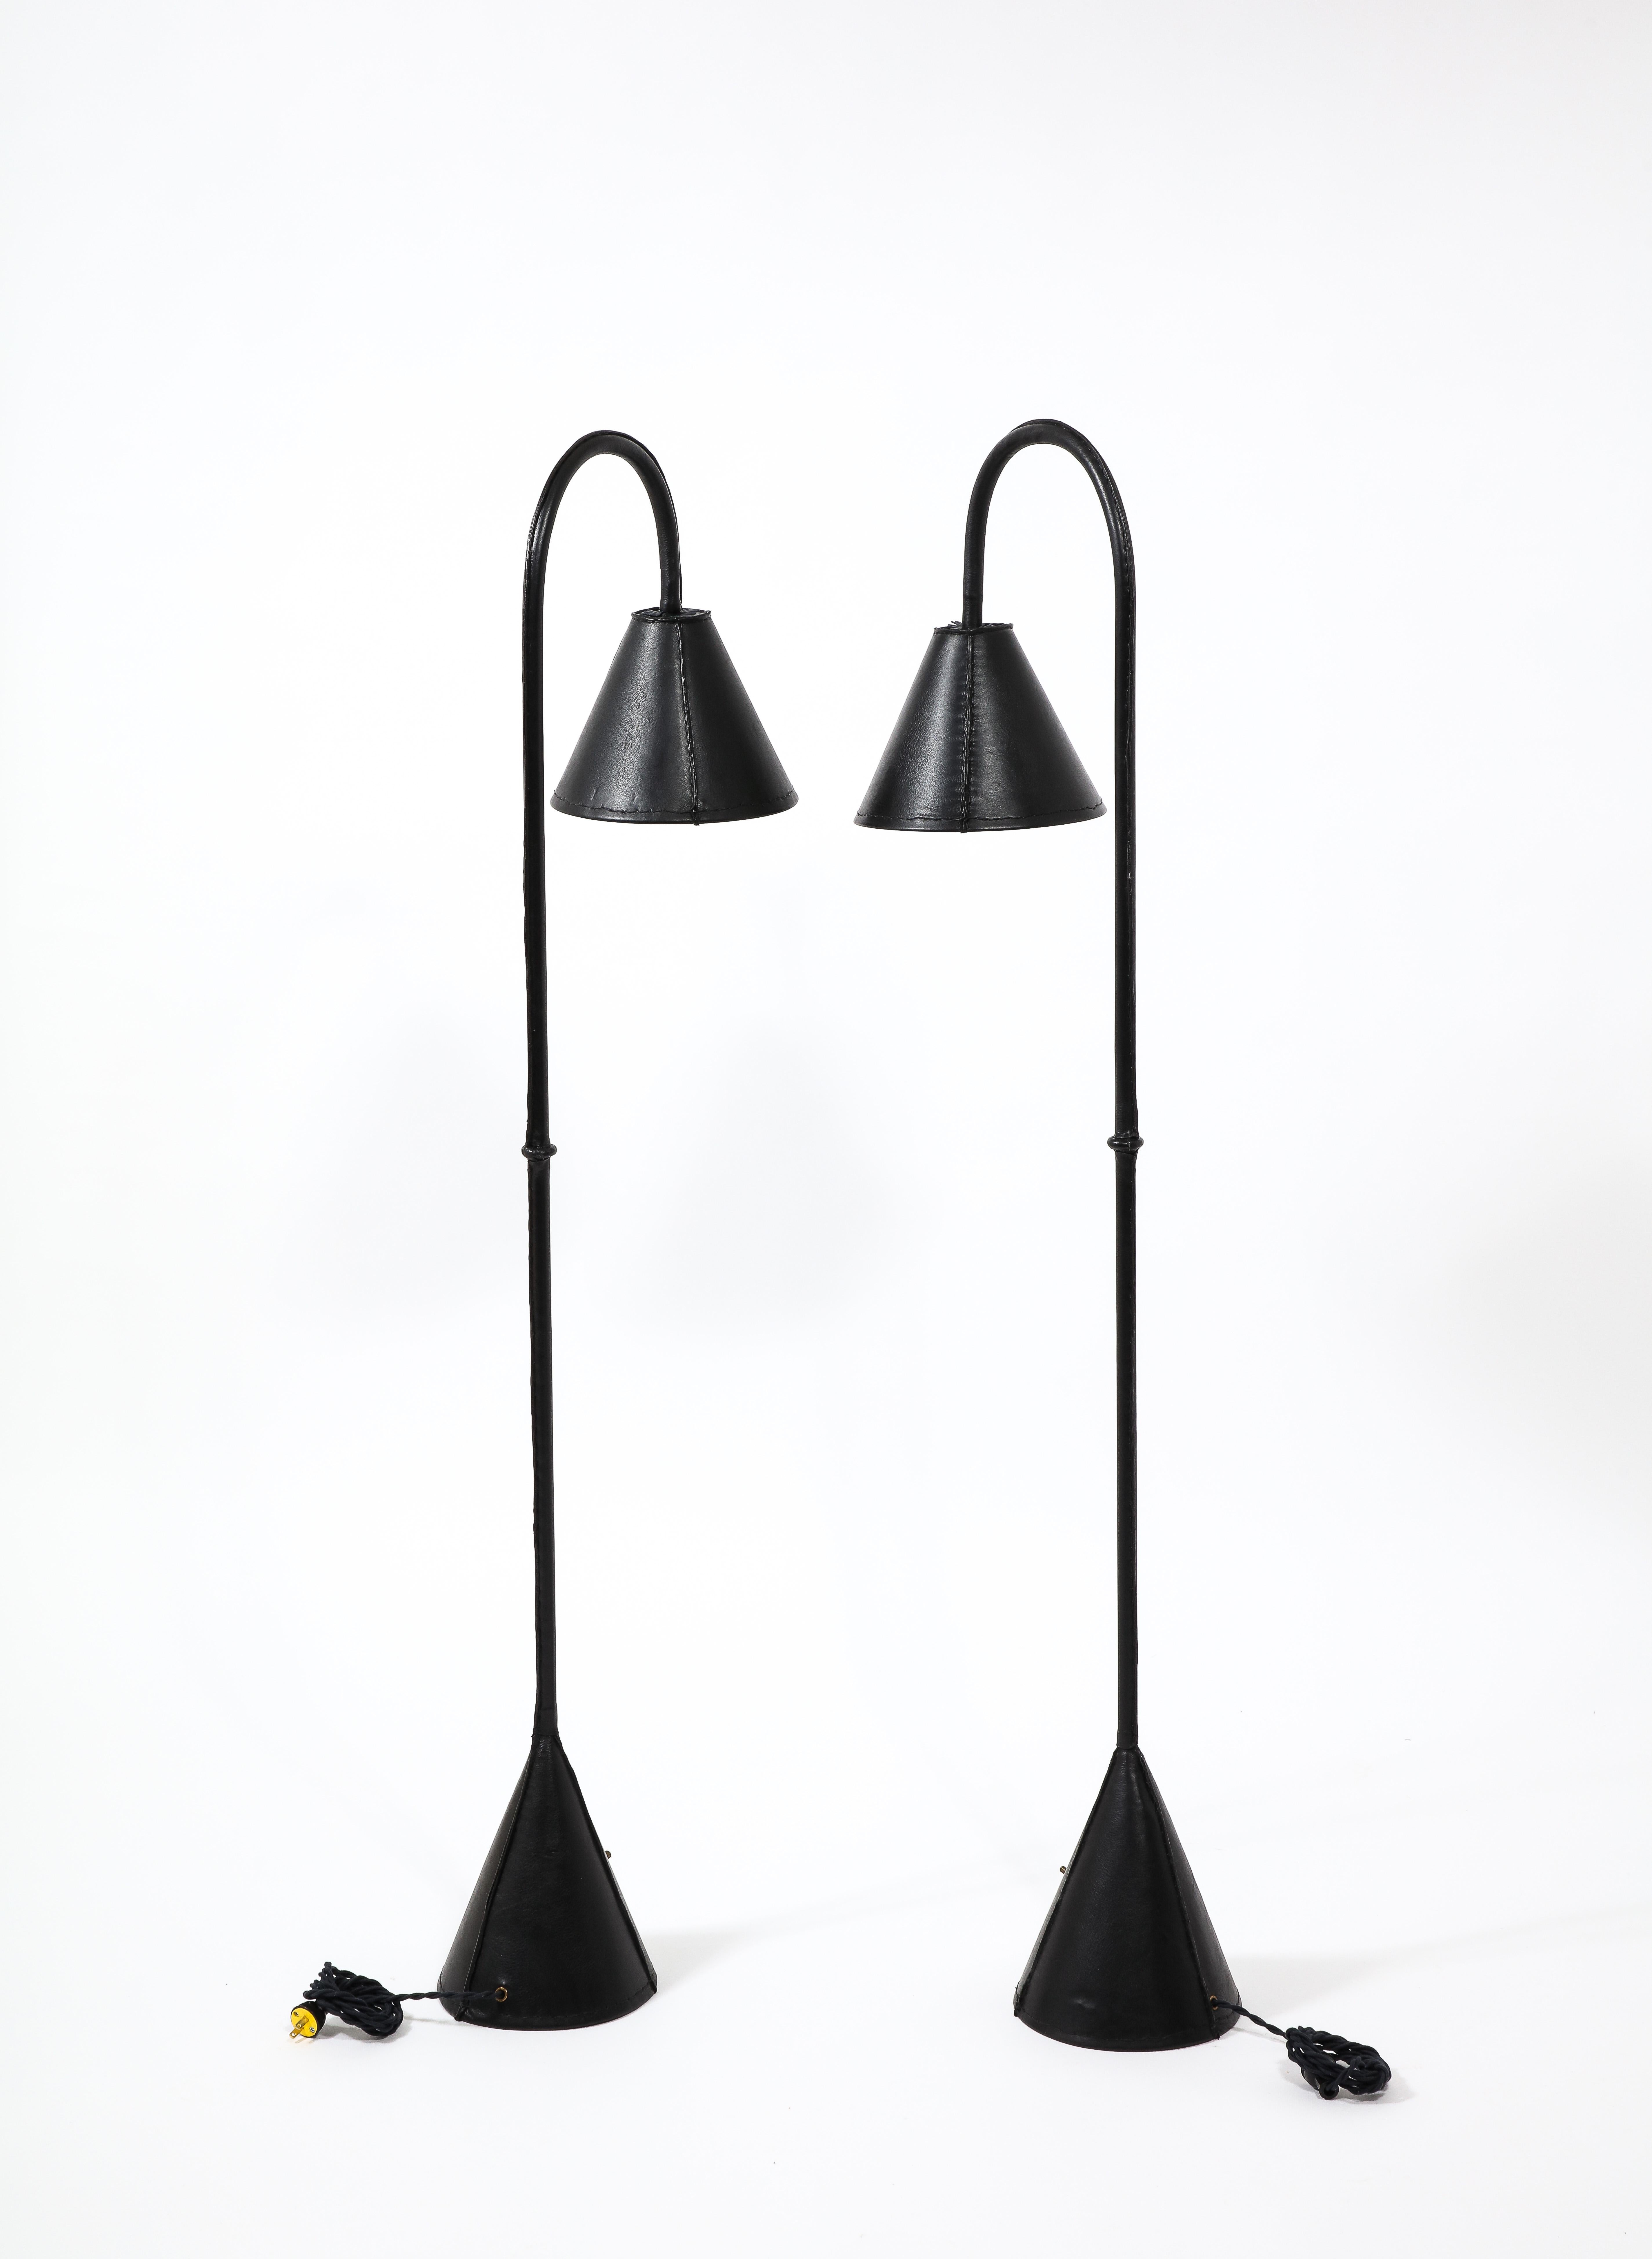 Valenti Reading Lamps in Stitched Leather, France 1960's For Sale 6